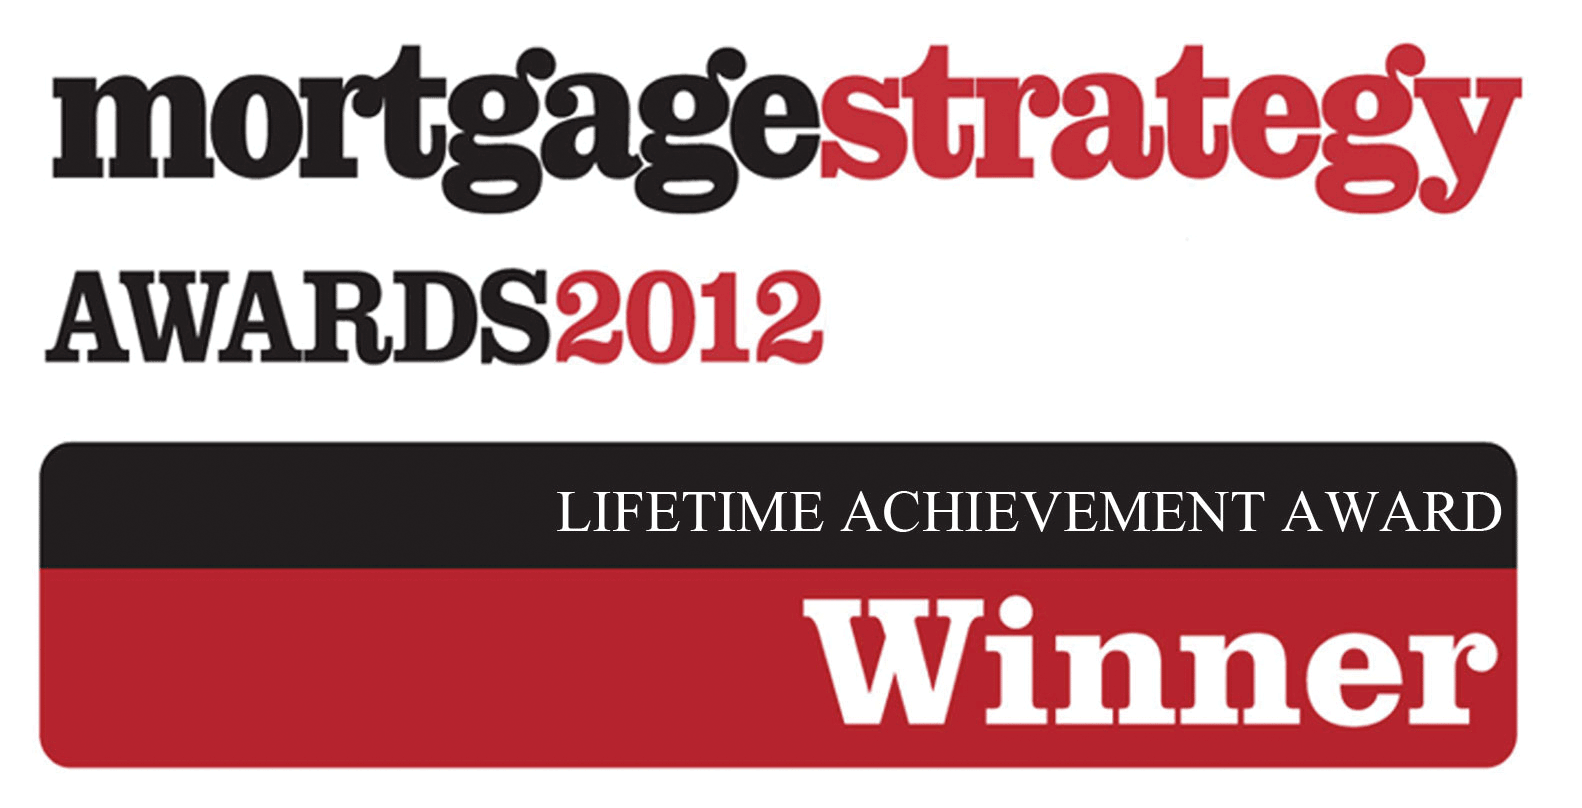 Mortgage Strategy 2012